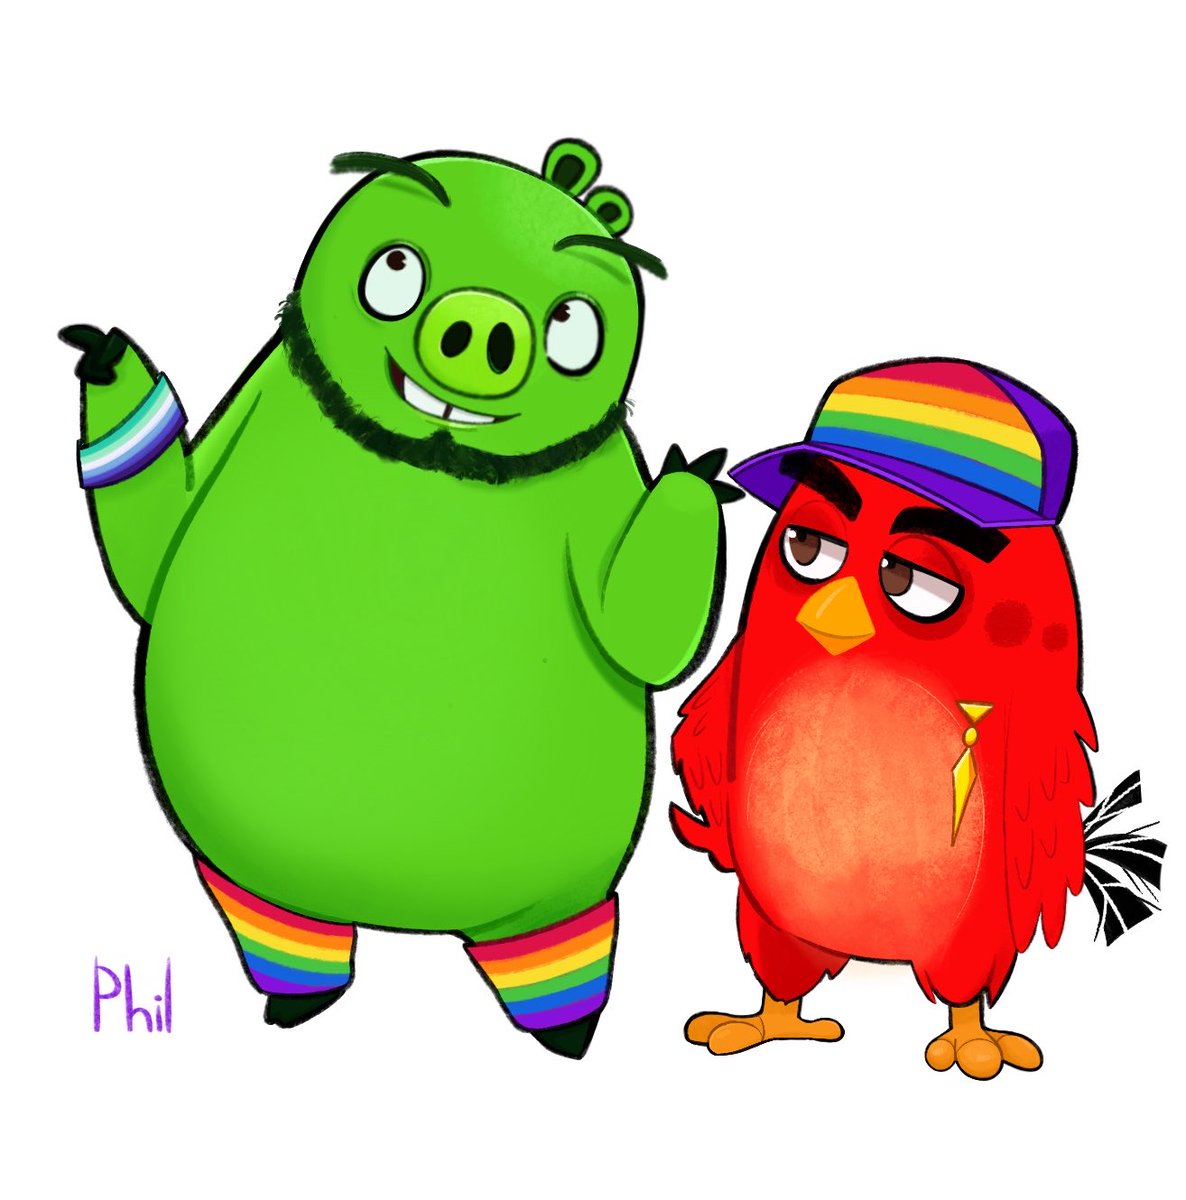 HAPPY PRIDE!! Here are the boyfriends ❤️🧡💛💚💙💜  #AngryBirds